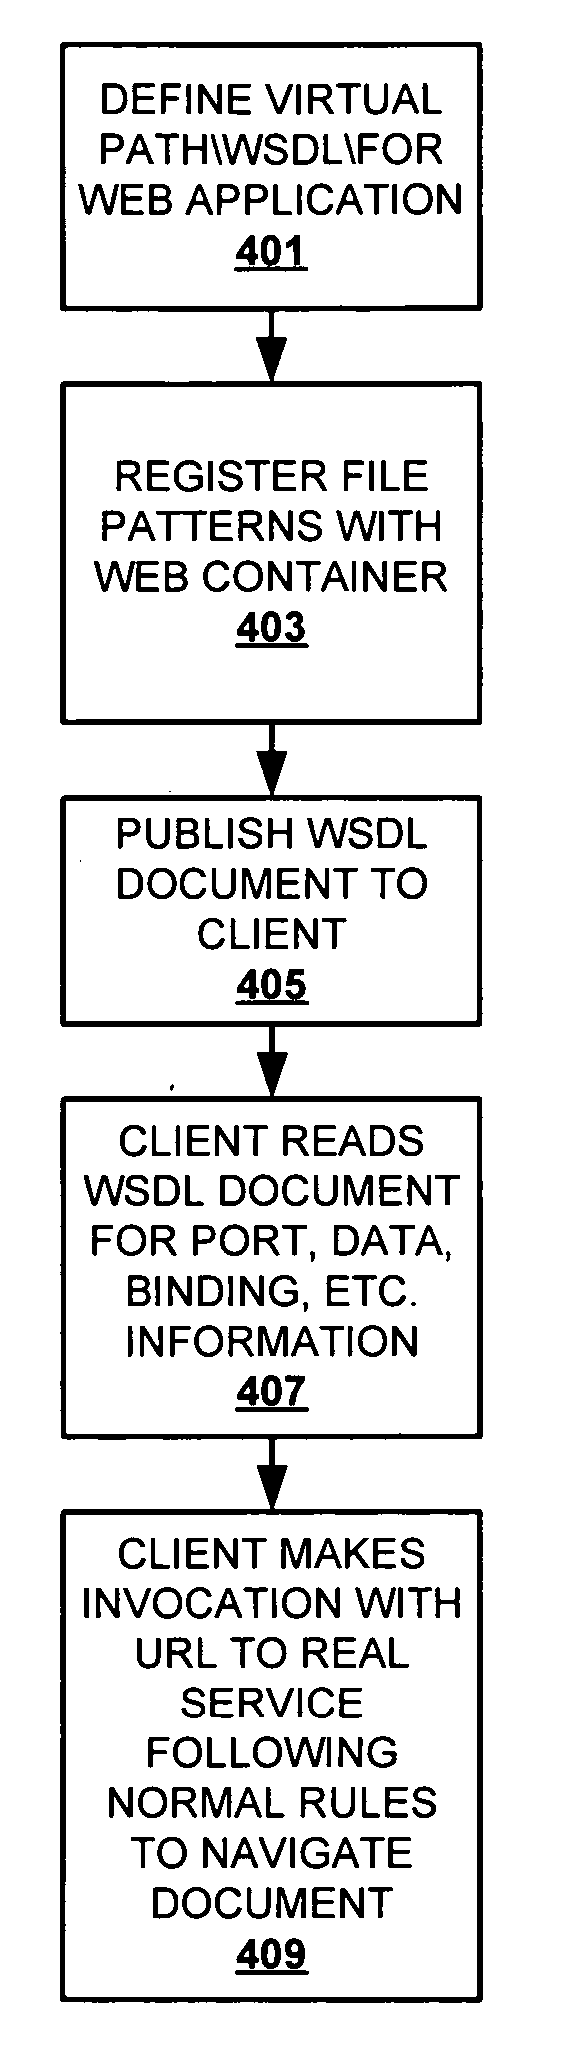 Publishing multipart WSDL files to URL